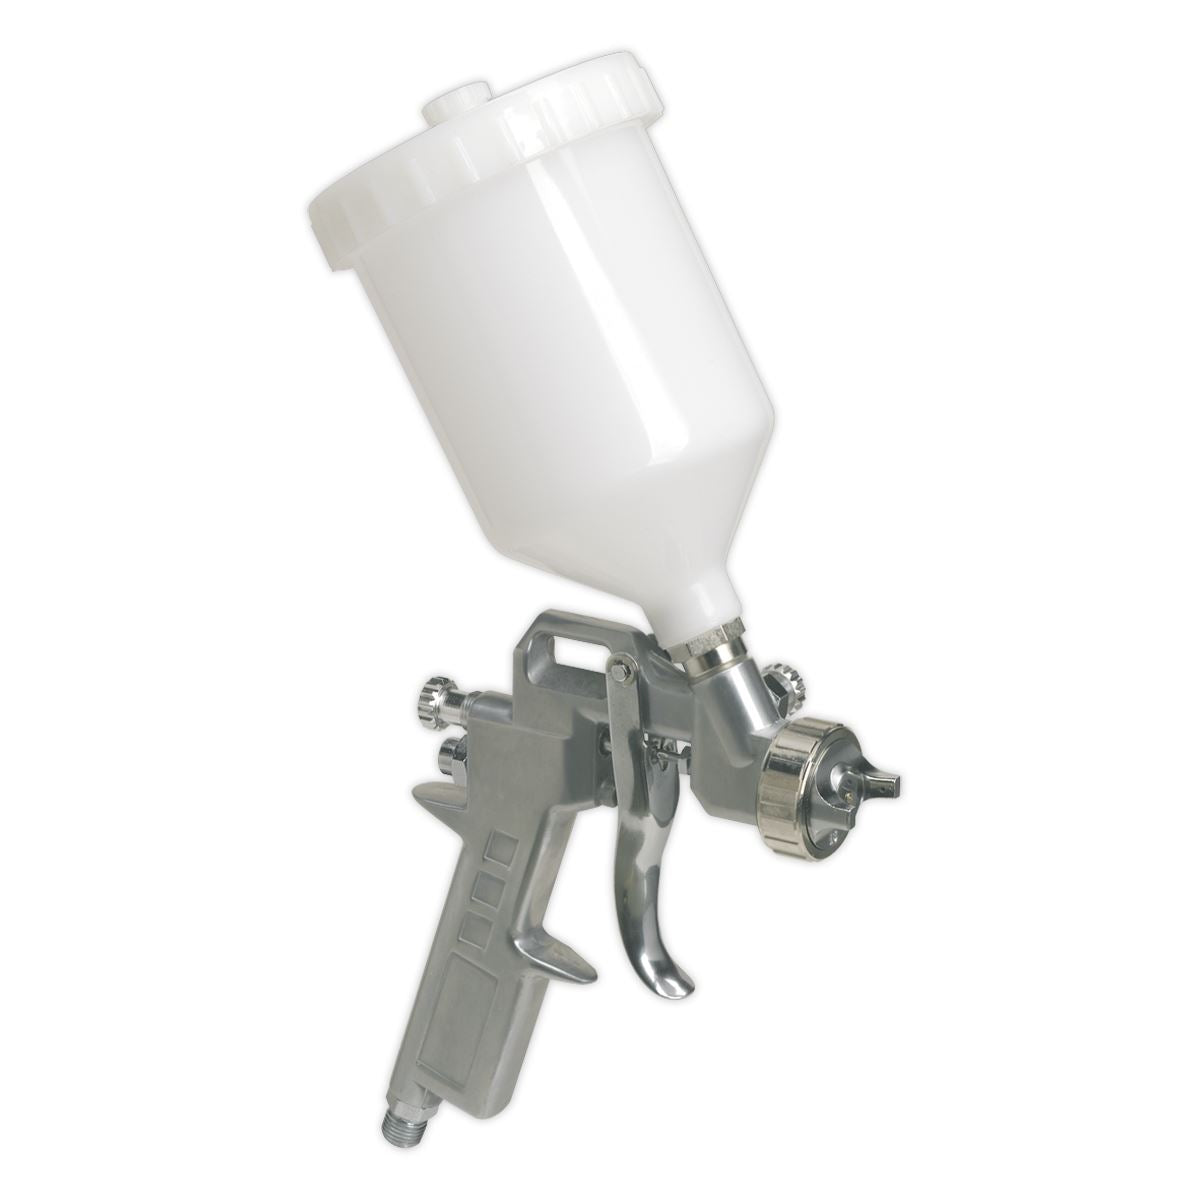 Sealey Gravity Feed Spray Gun with 1.8mm Set Up Adjustable Paint Flow